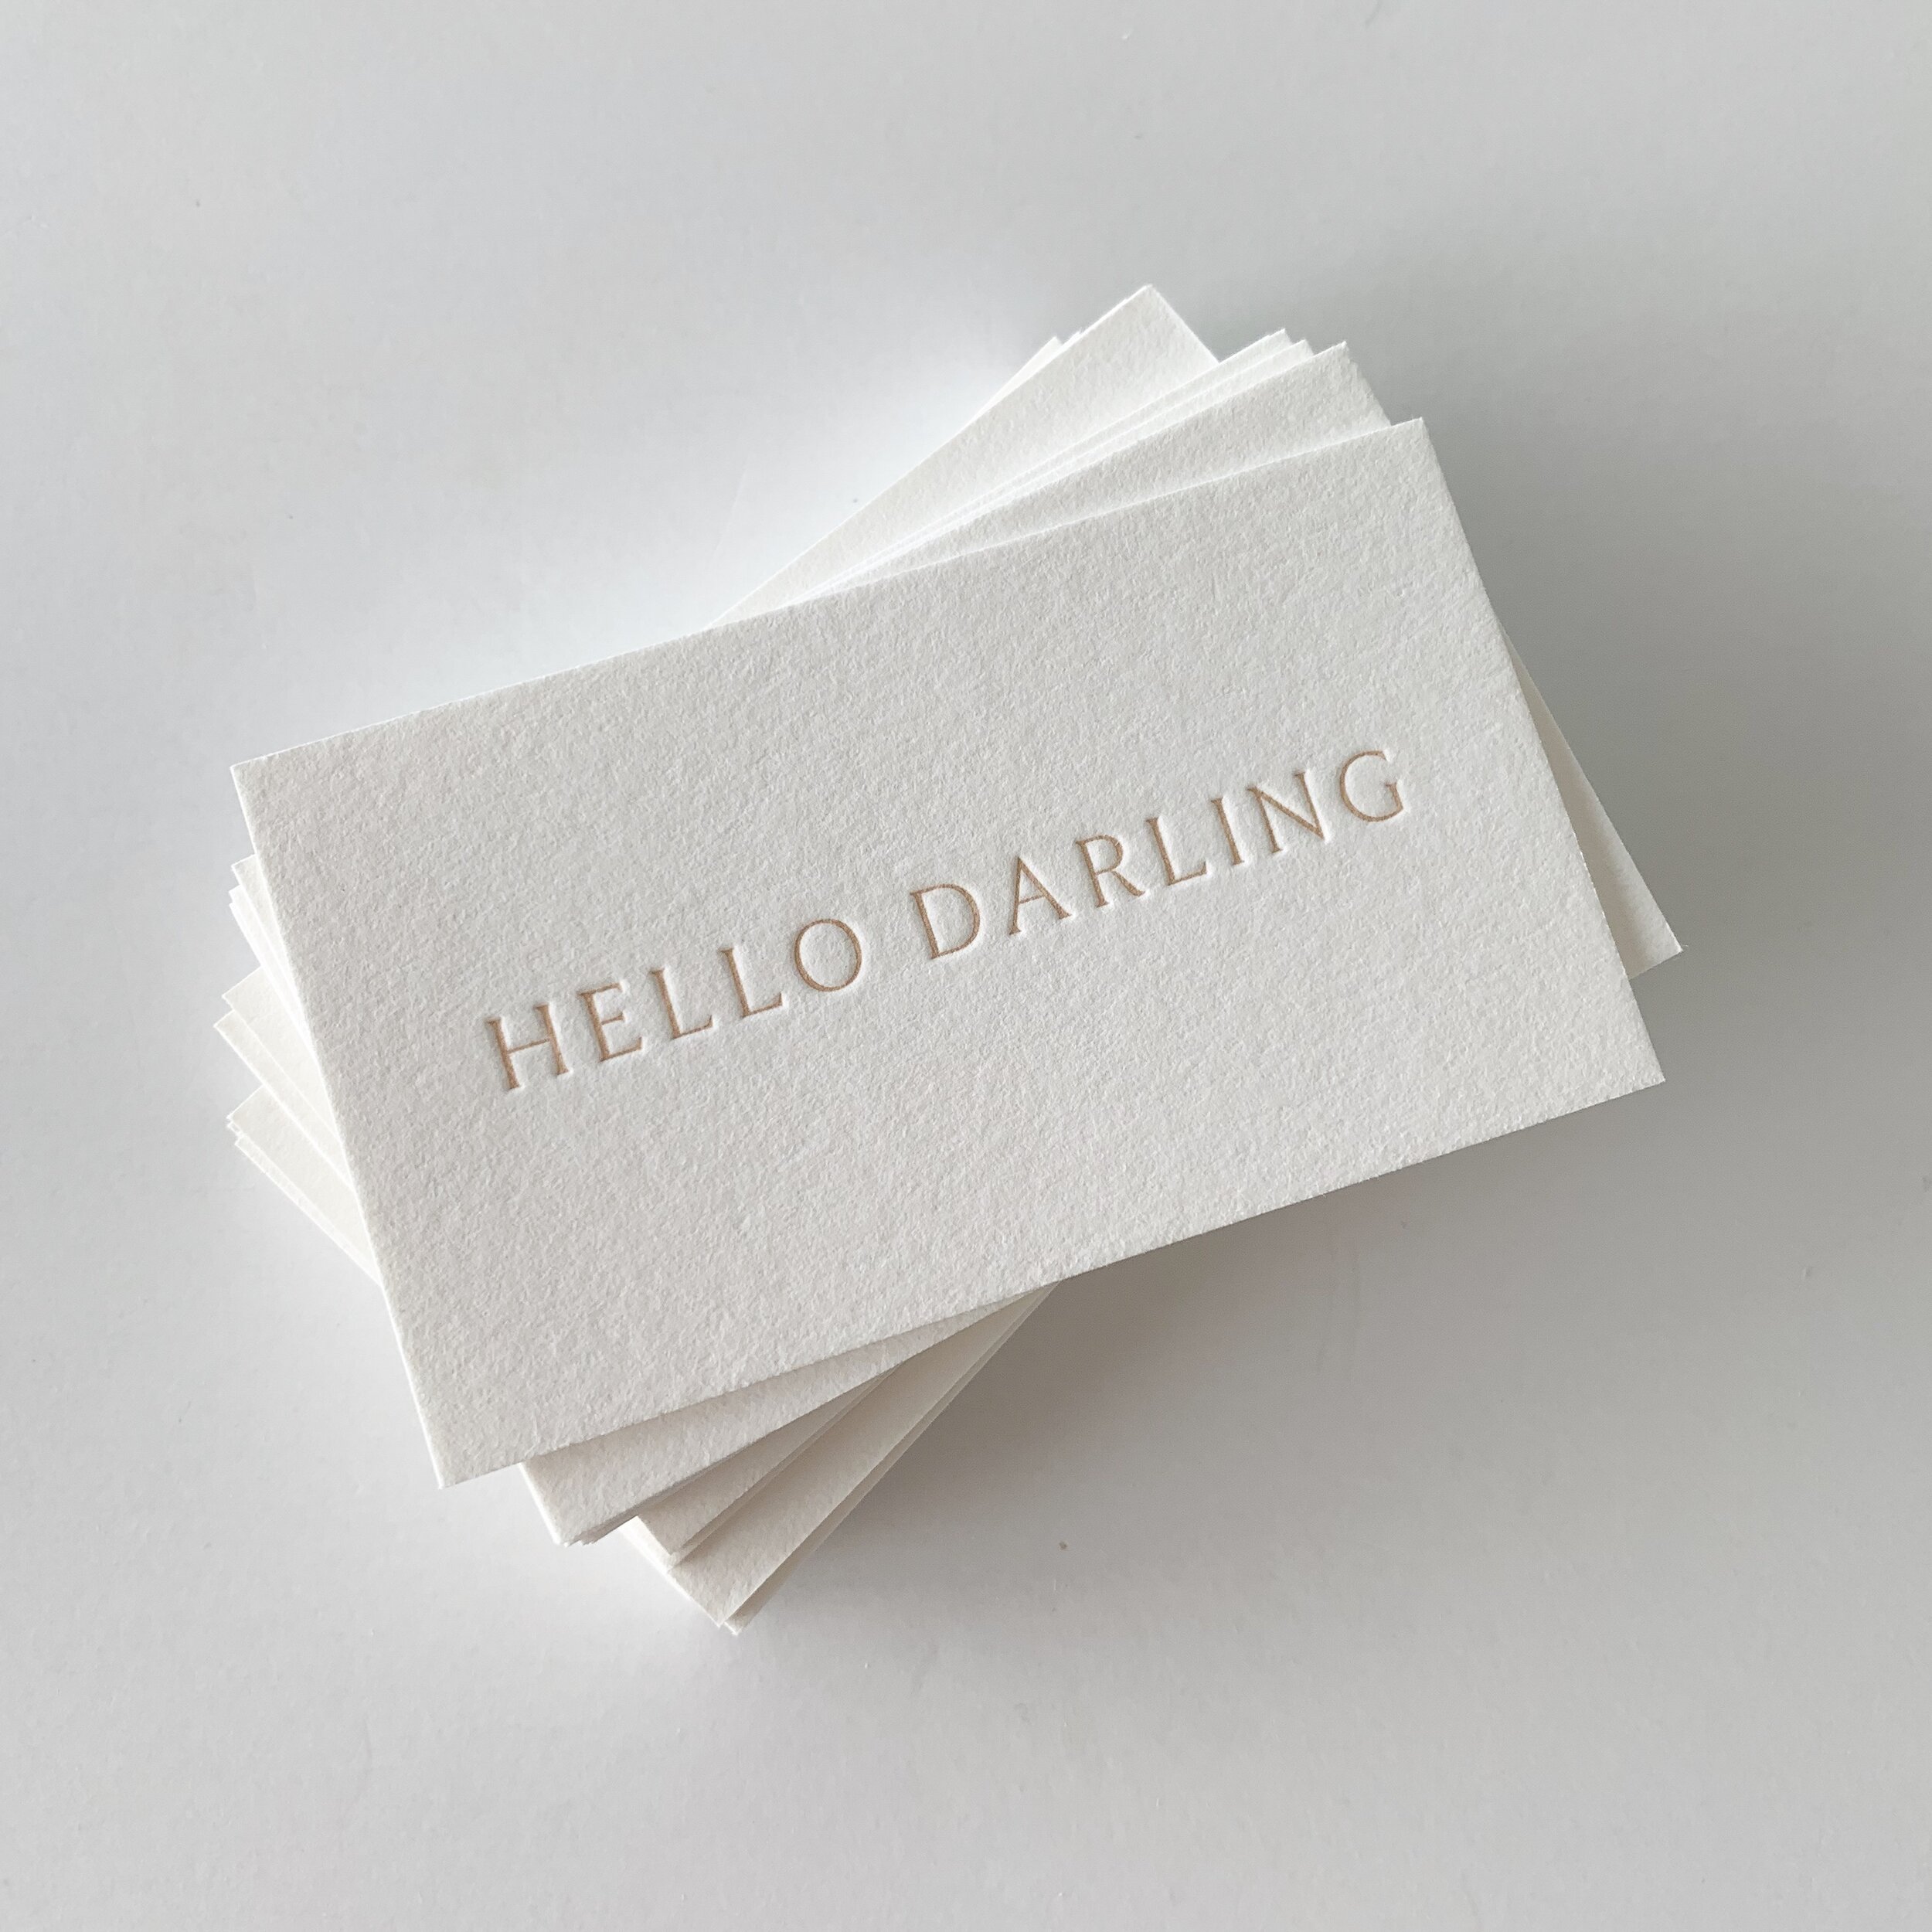 Swell Press for Valorie Darling